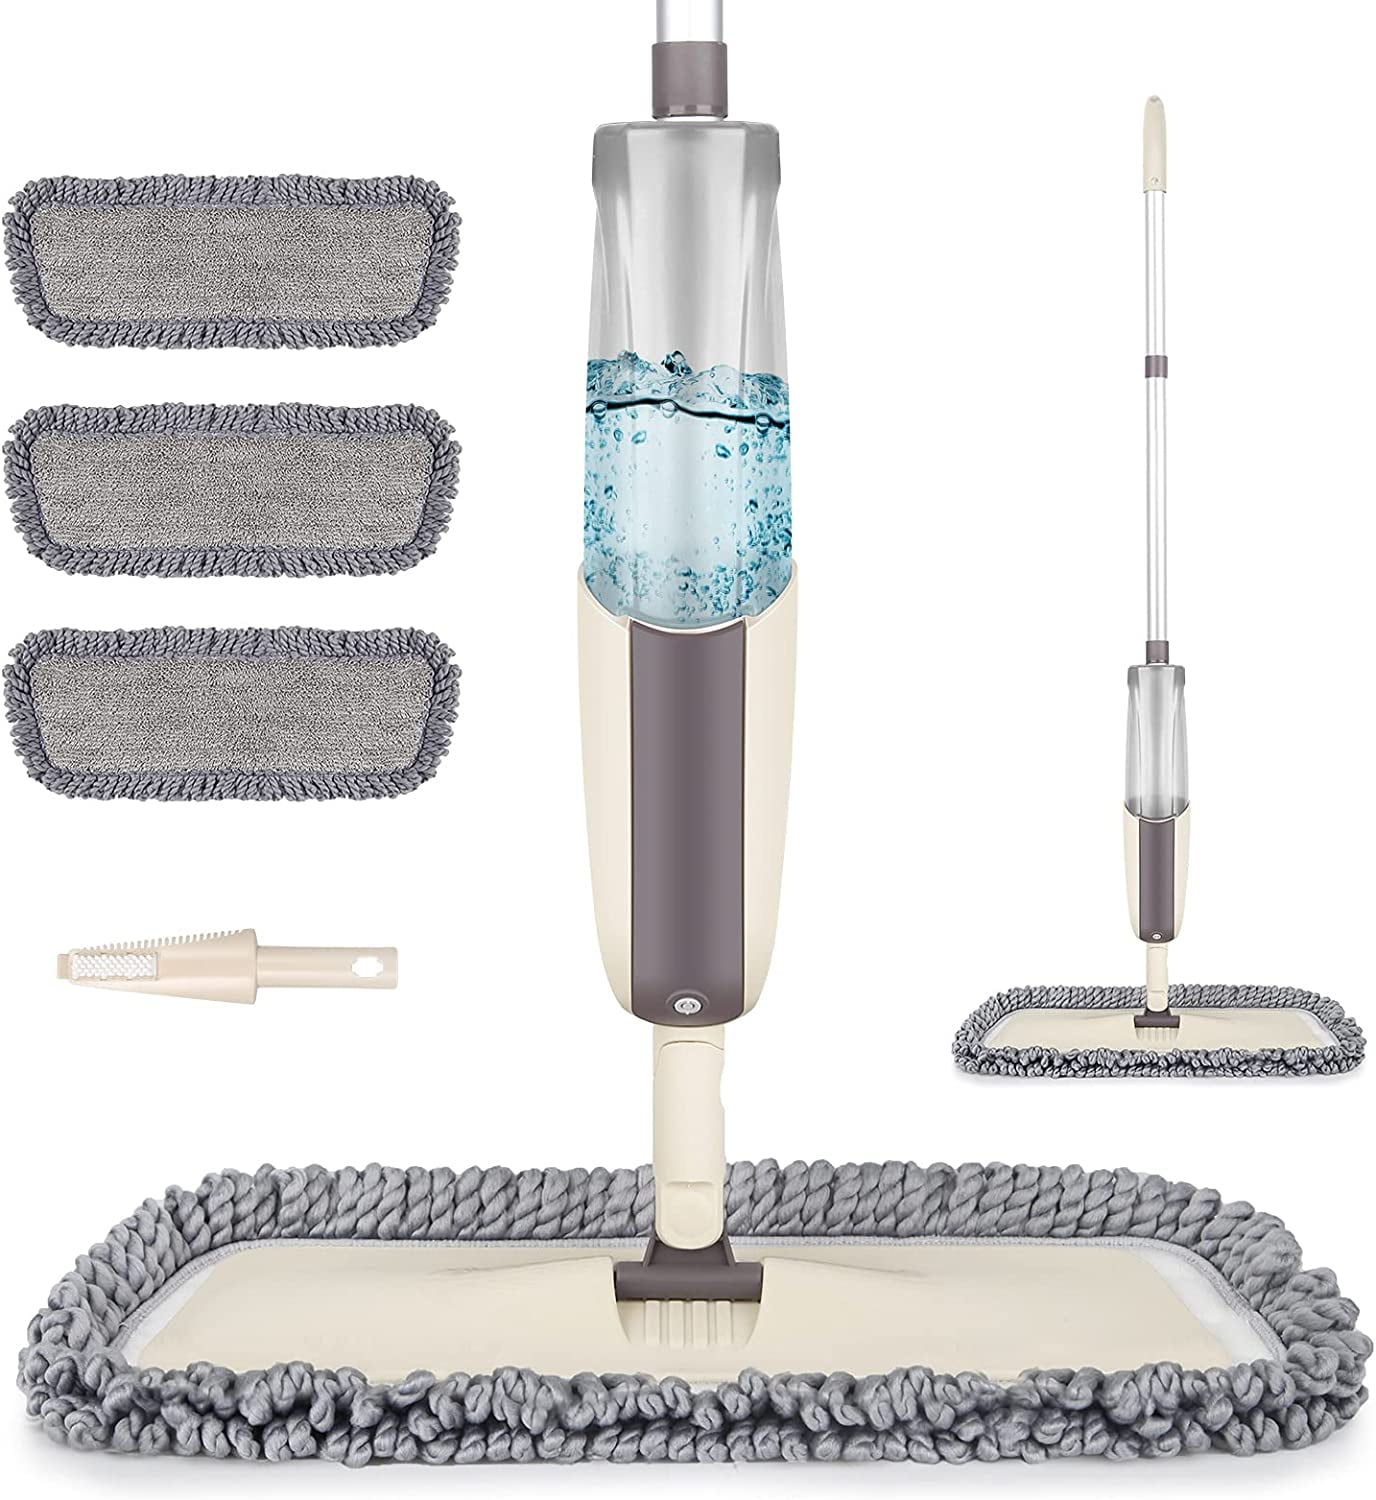 Spray Mop Floor Cleaning System – Podsy